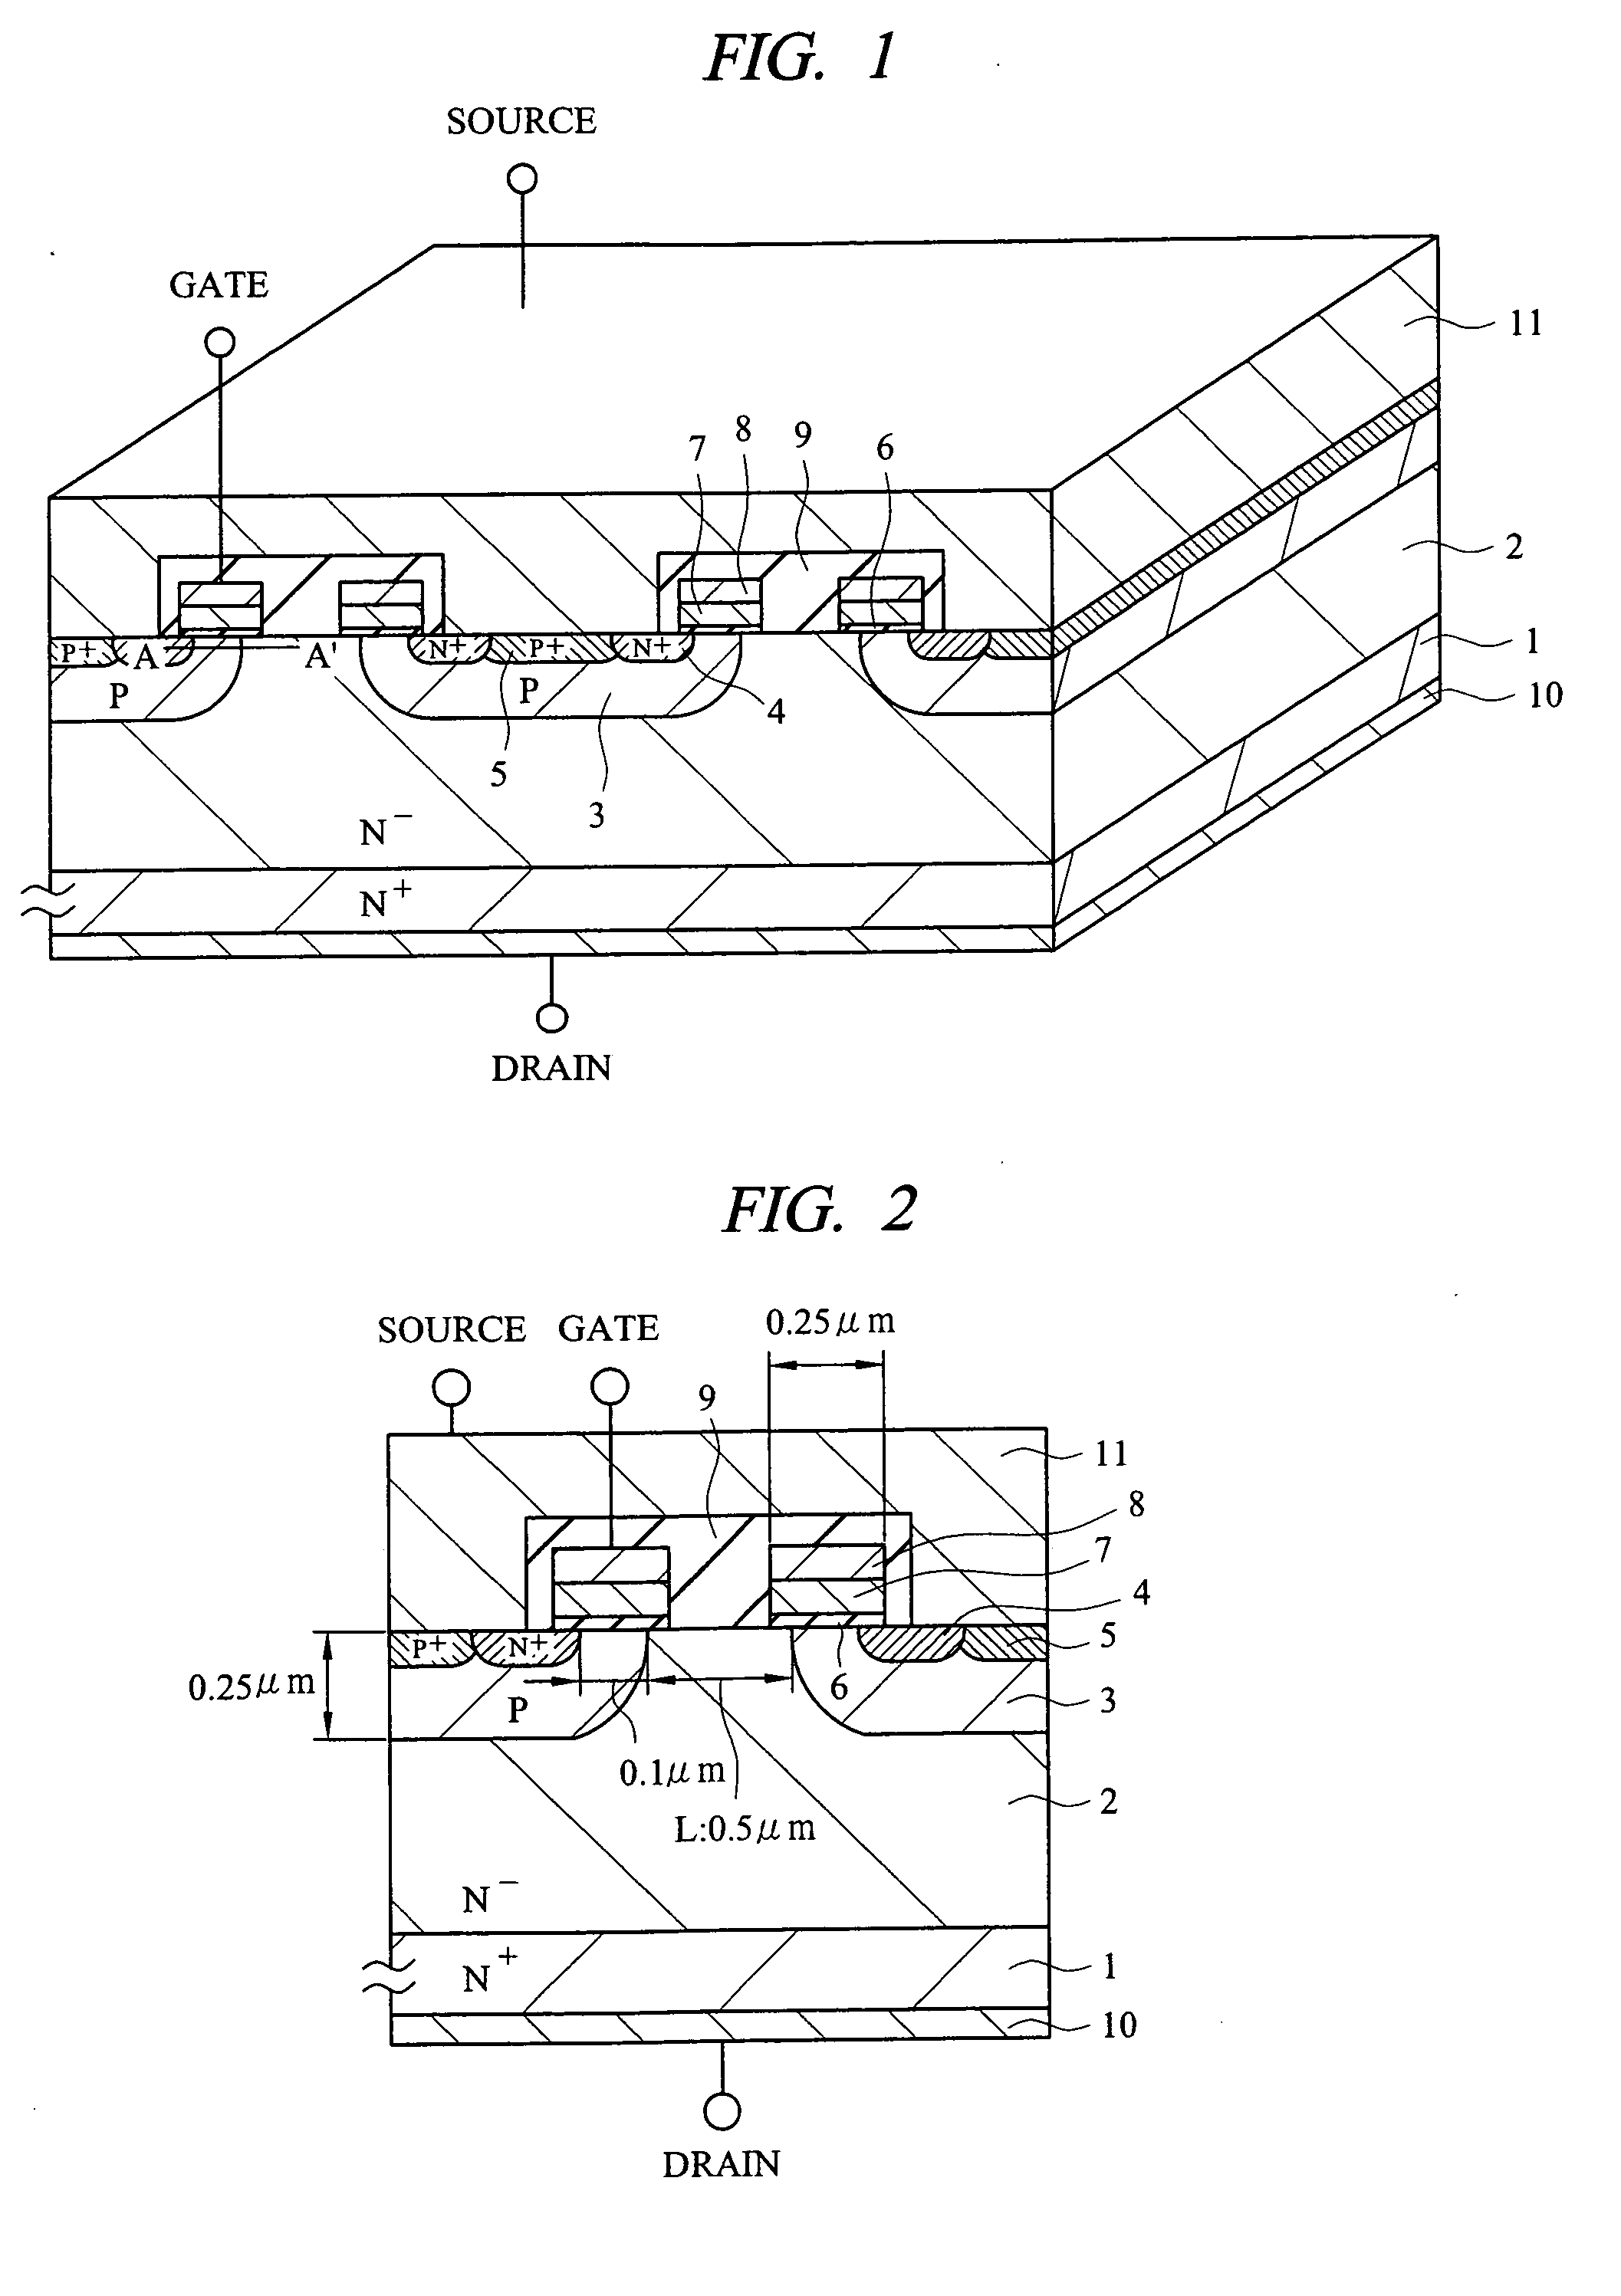 DMOSFET and planar type MOSFET